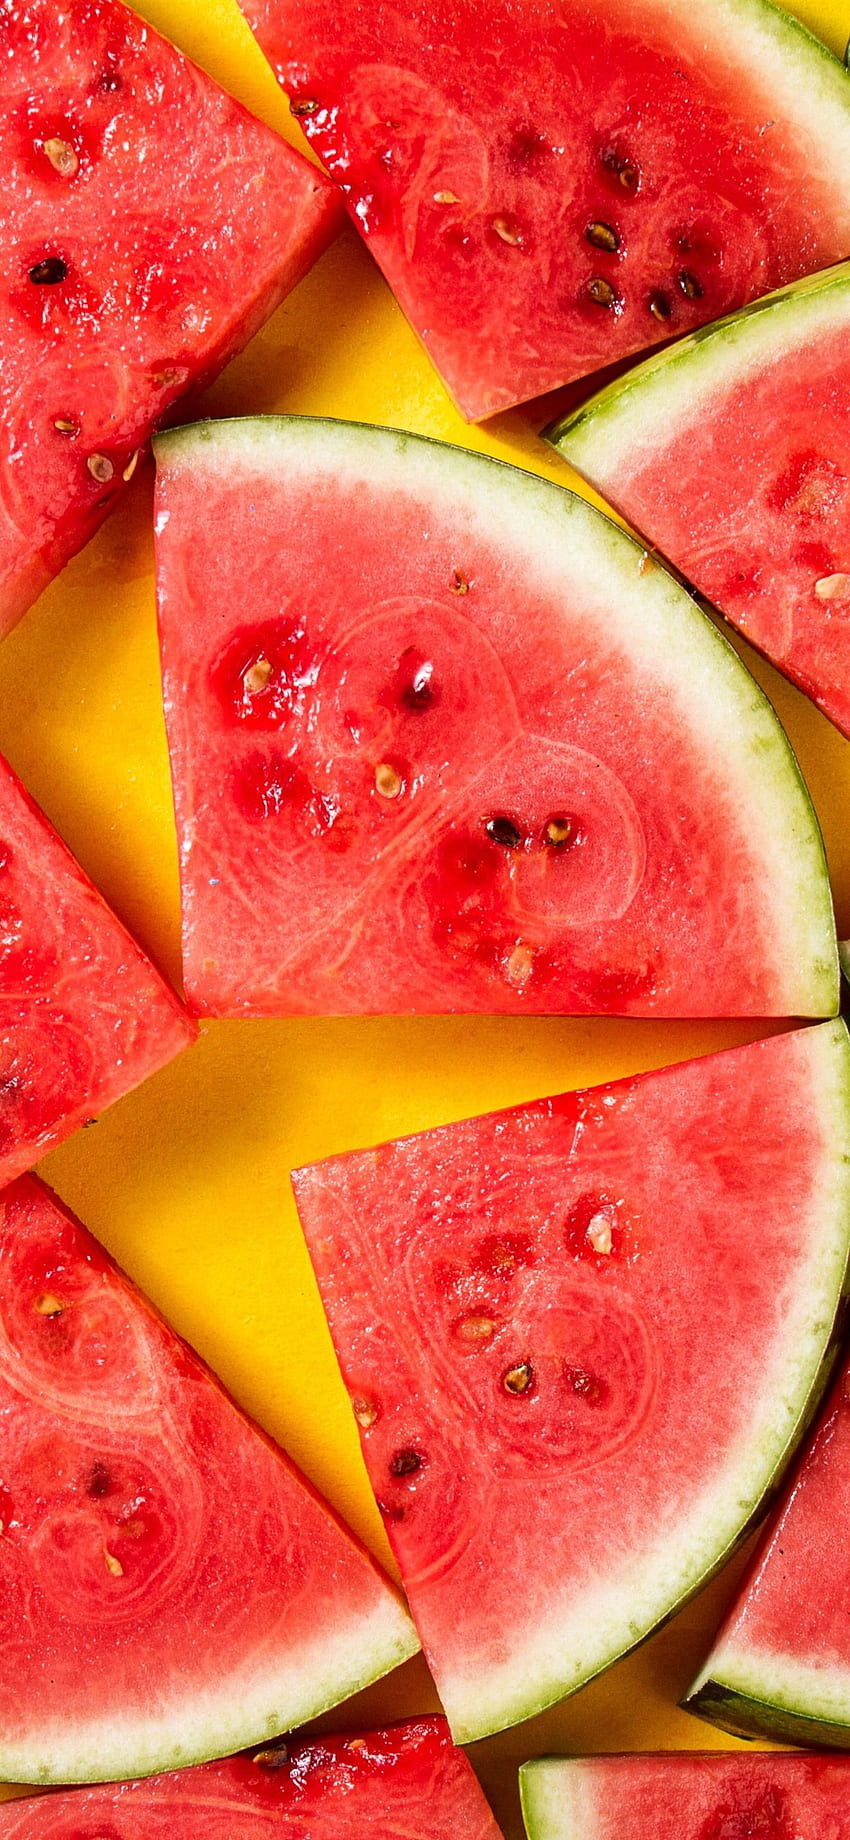 Summer Fruit, Some Slices Of Watermelon IPhone 11 Pro XS HD phone wallpaper